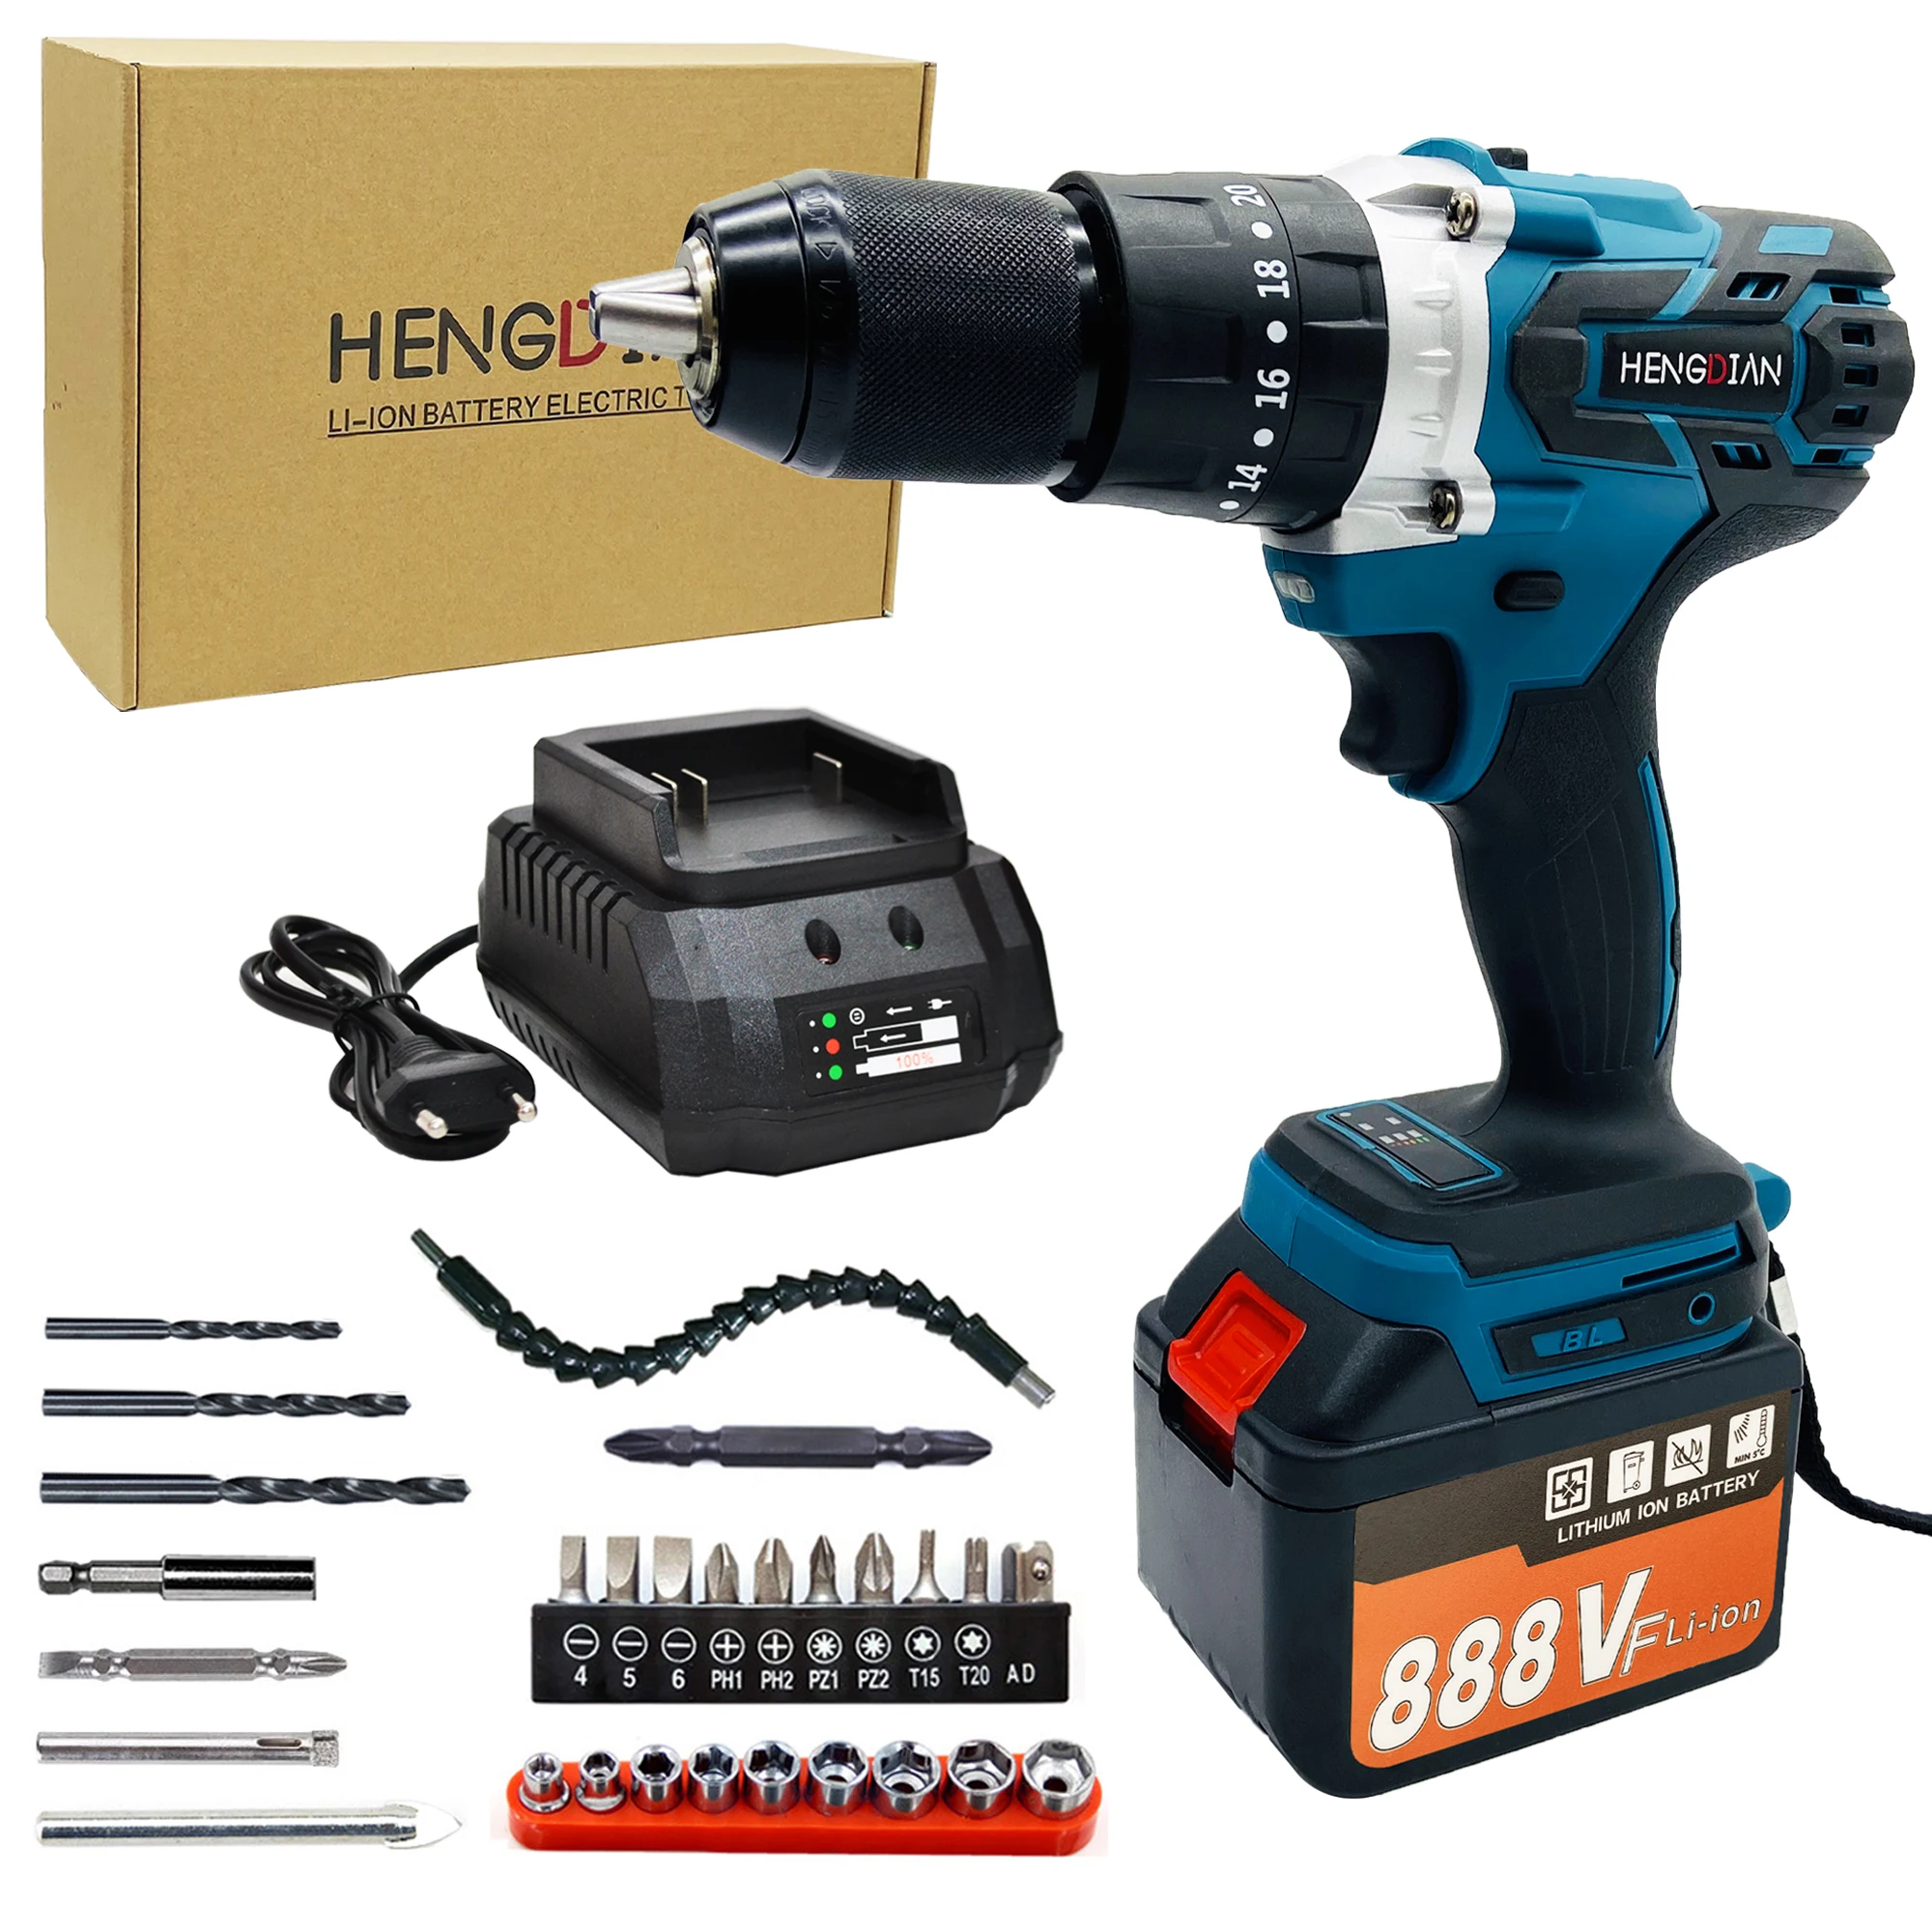 20V Brushless Battery Screwdriver Craft Drill Set Adjustable Torque Machine Impact Cordless Power Tools Electric Drill household rechargeable drill screwdriver tools professional battery impact mini drill cordless portable machine hardware product